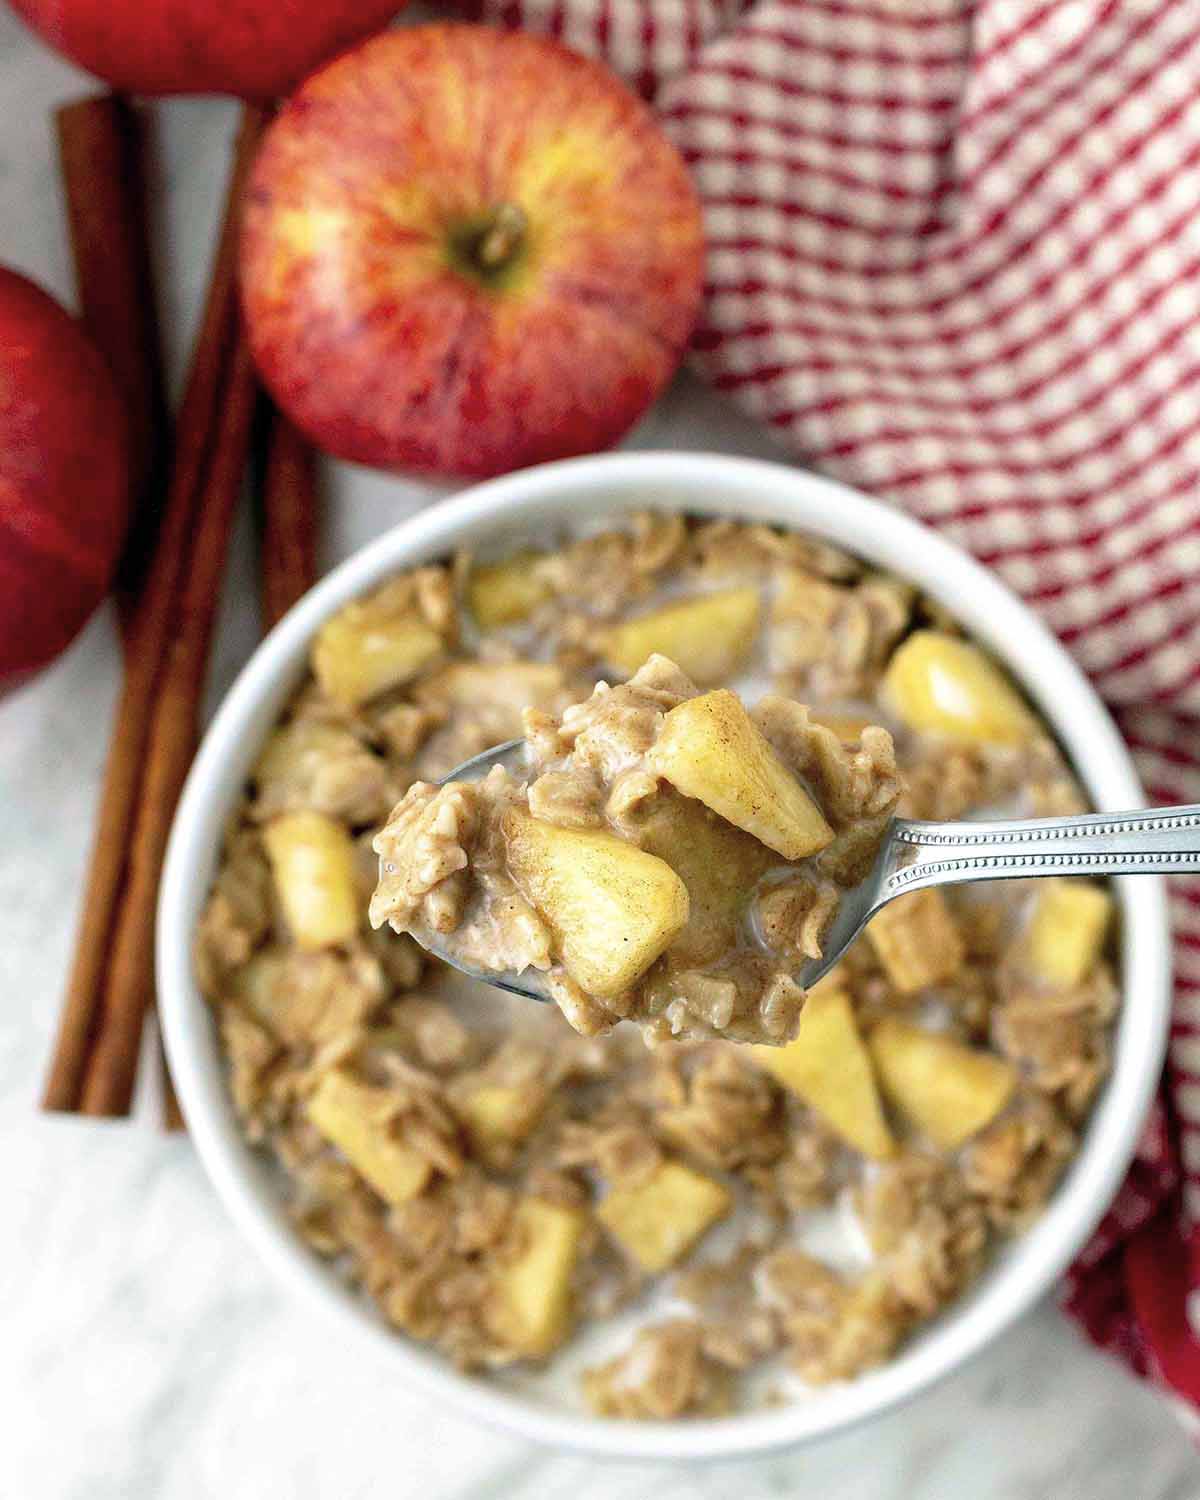 A spoonful of vegan apple cinnamon oatmeal being held up above a full bowl of the same oatmeal.